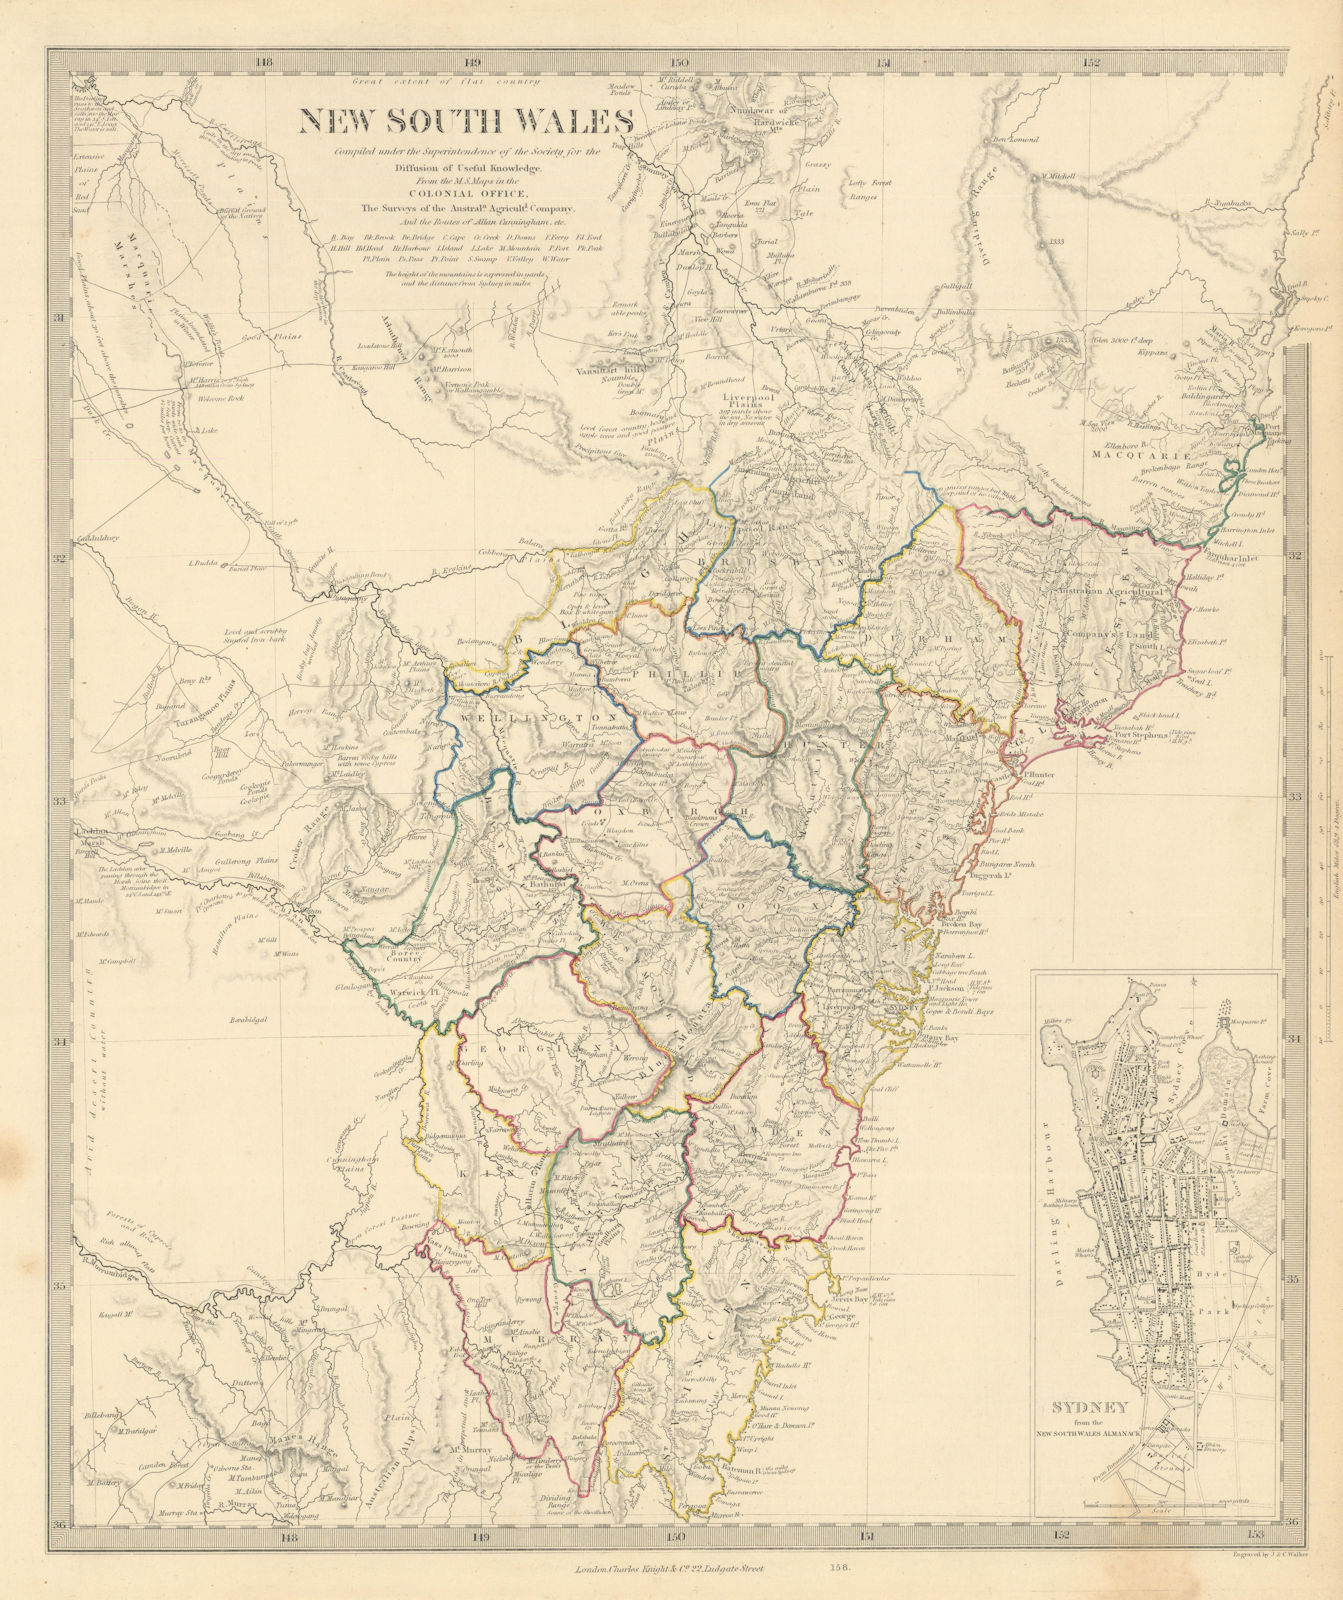 Associate Product NEW SOUTH WALES based on Cunningham routes. SYDNEY city plan. SDUK 1851 map